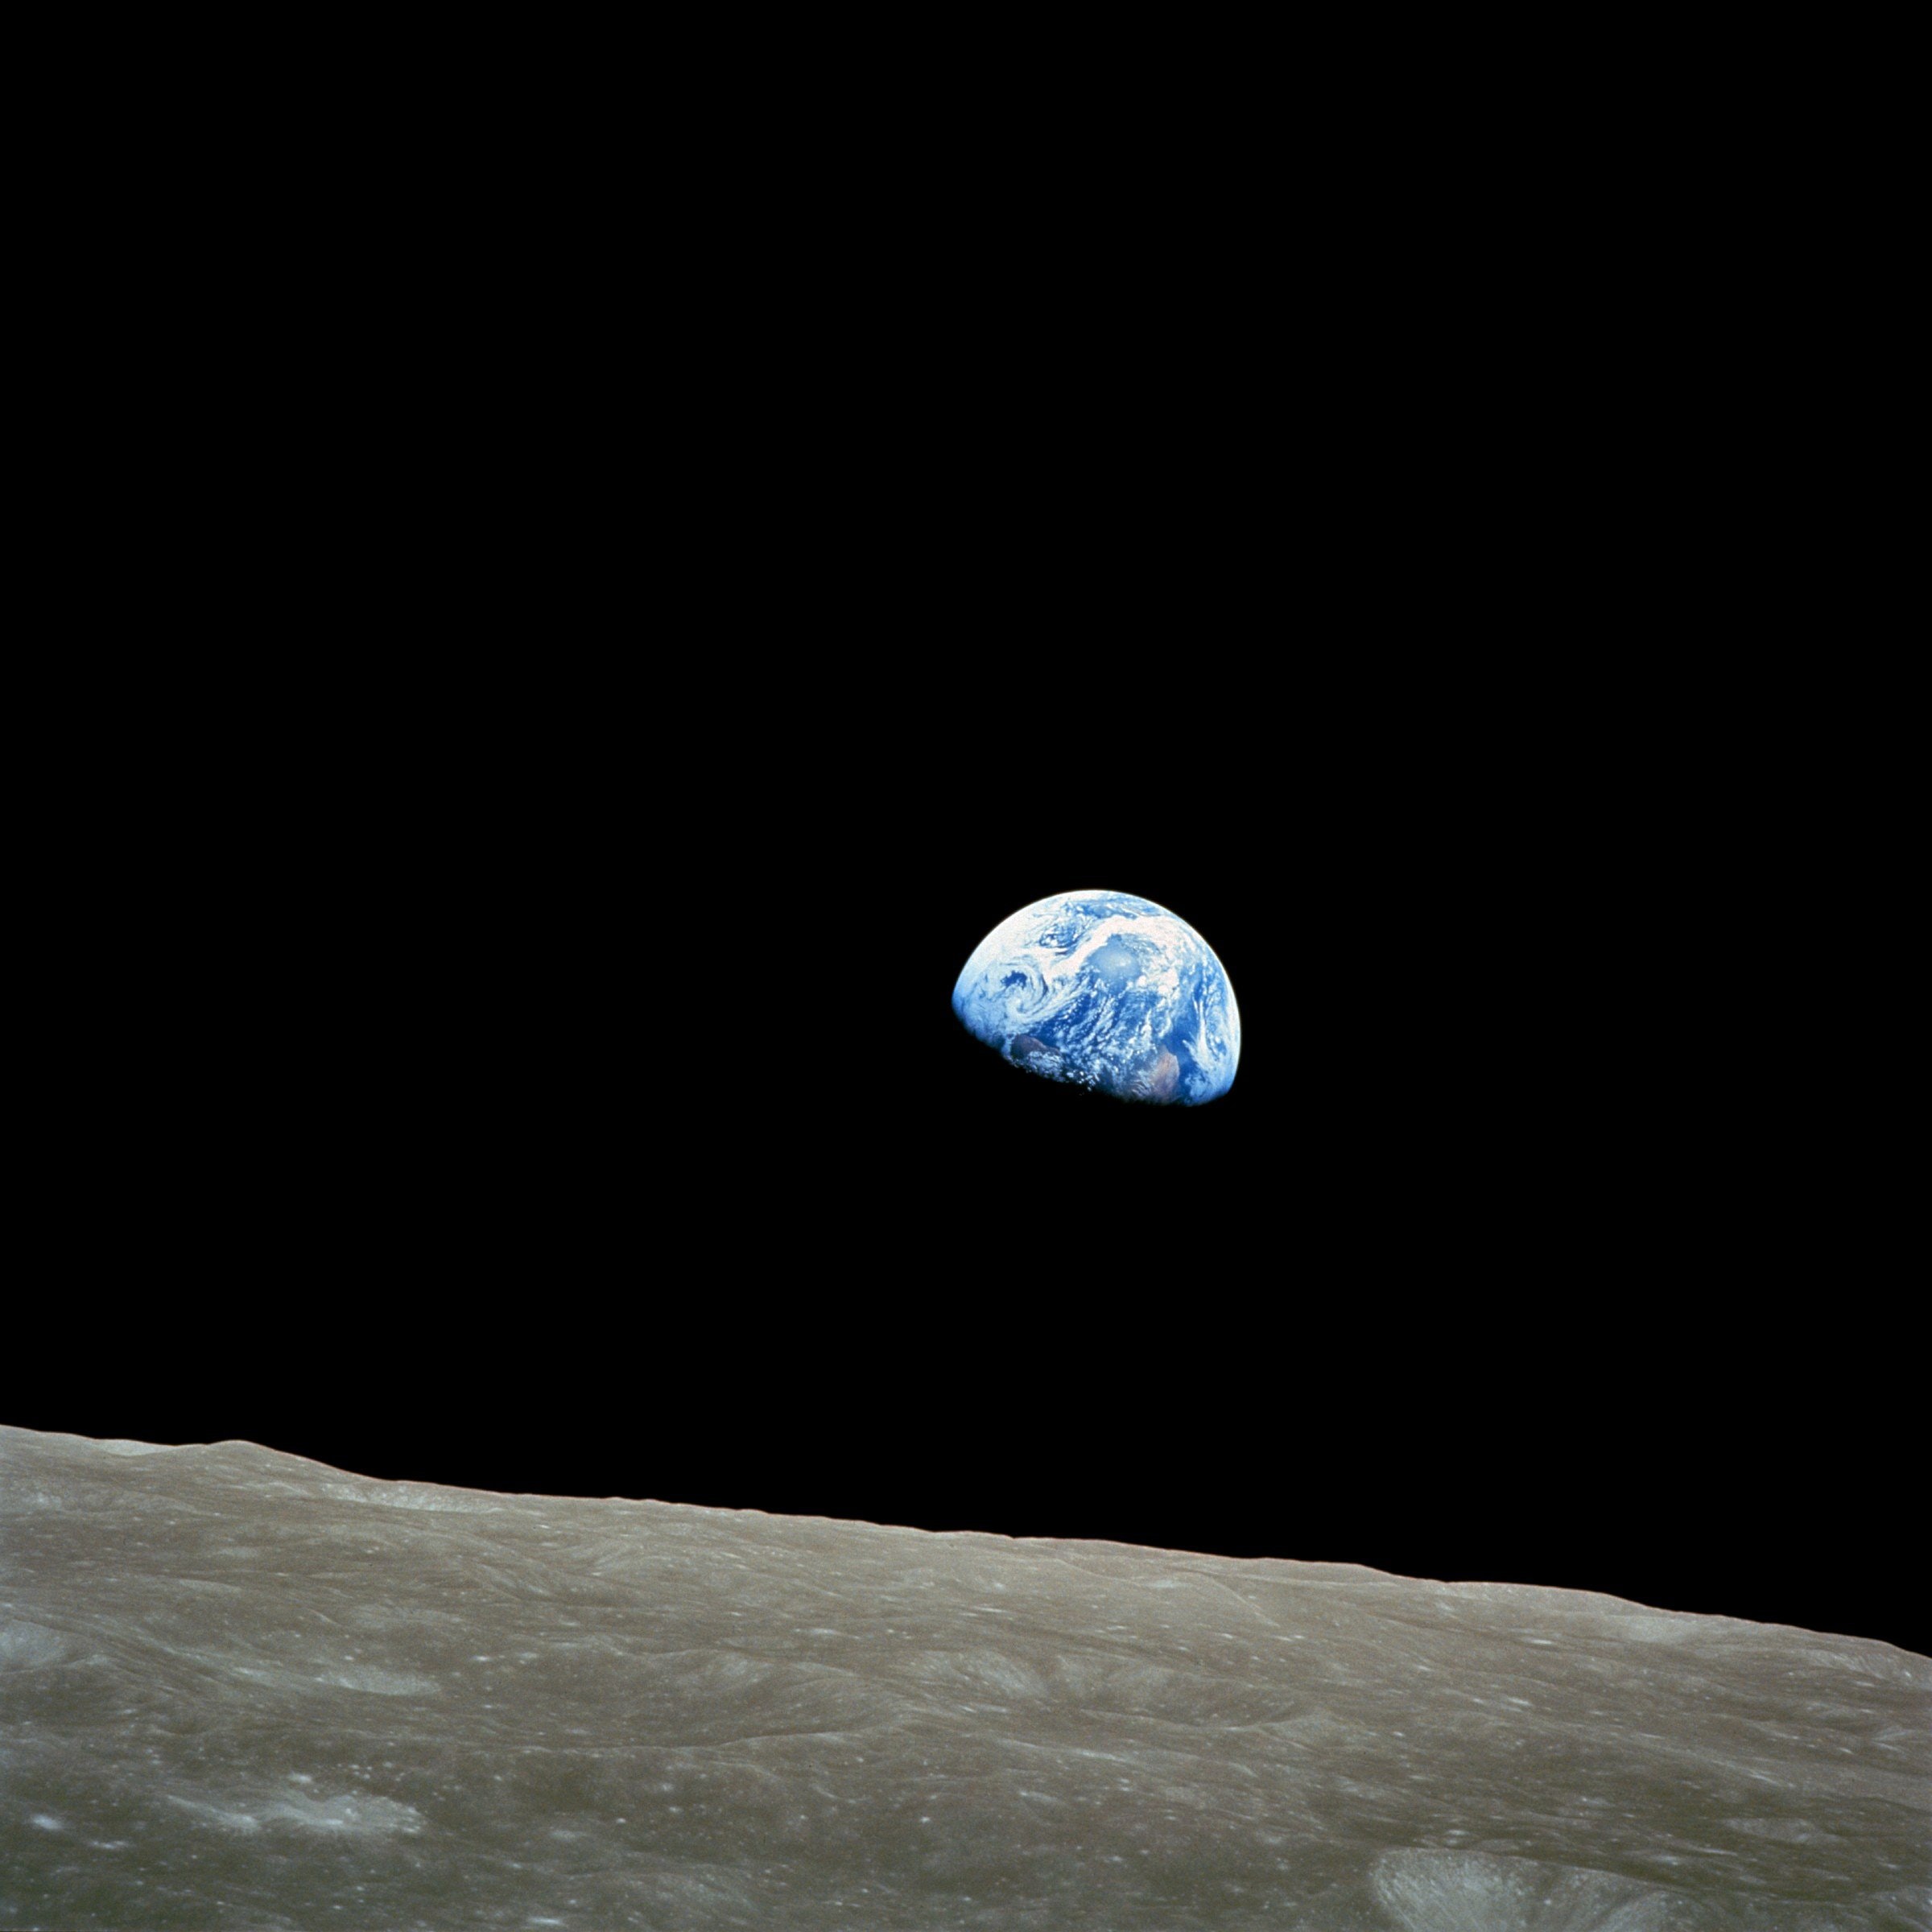 Blue and White Planet Display, Astronomy, Earth, Moon, Research, HQ Photo